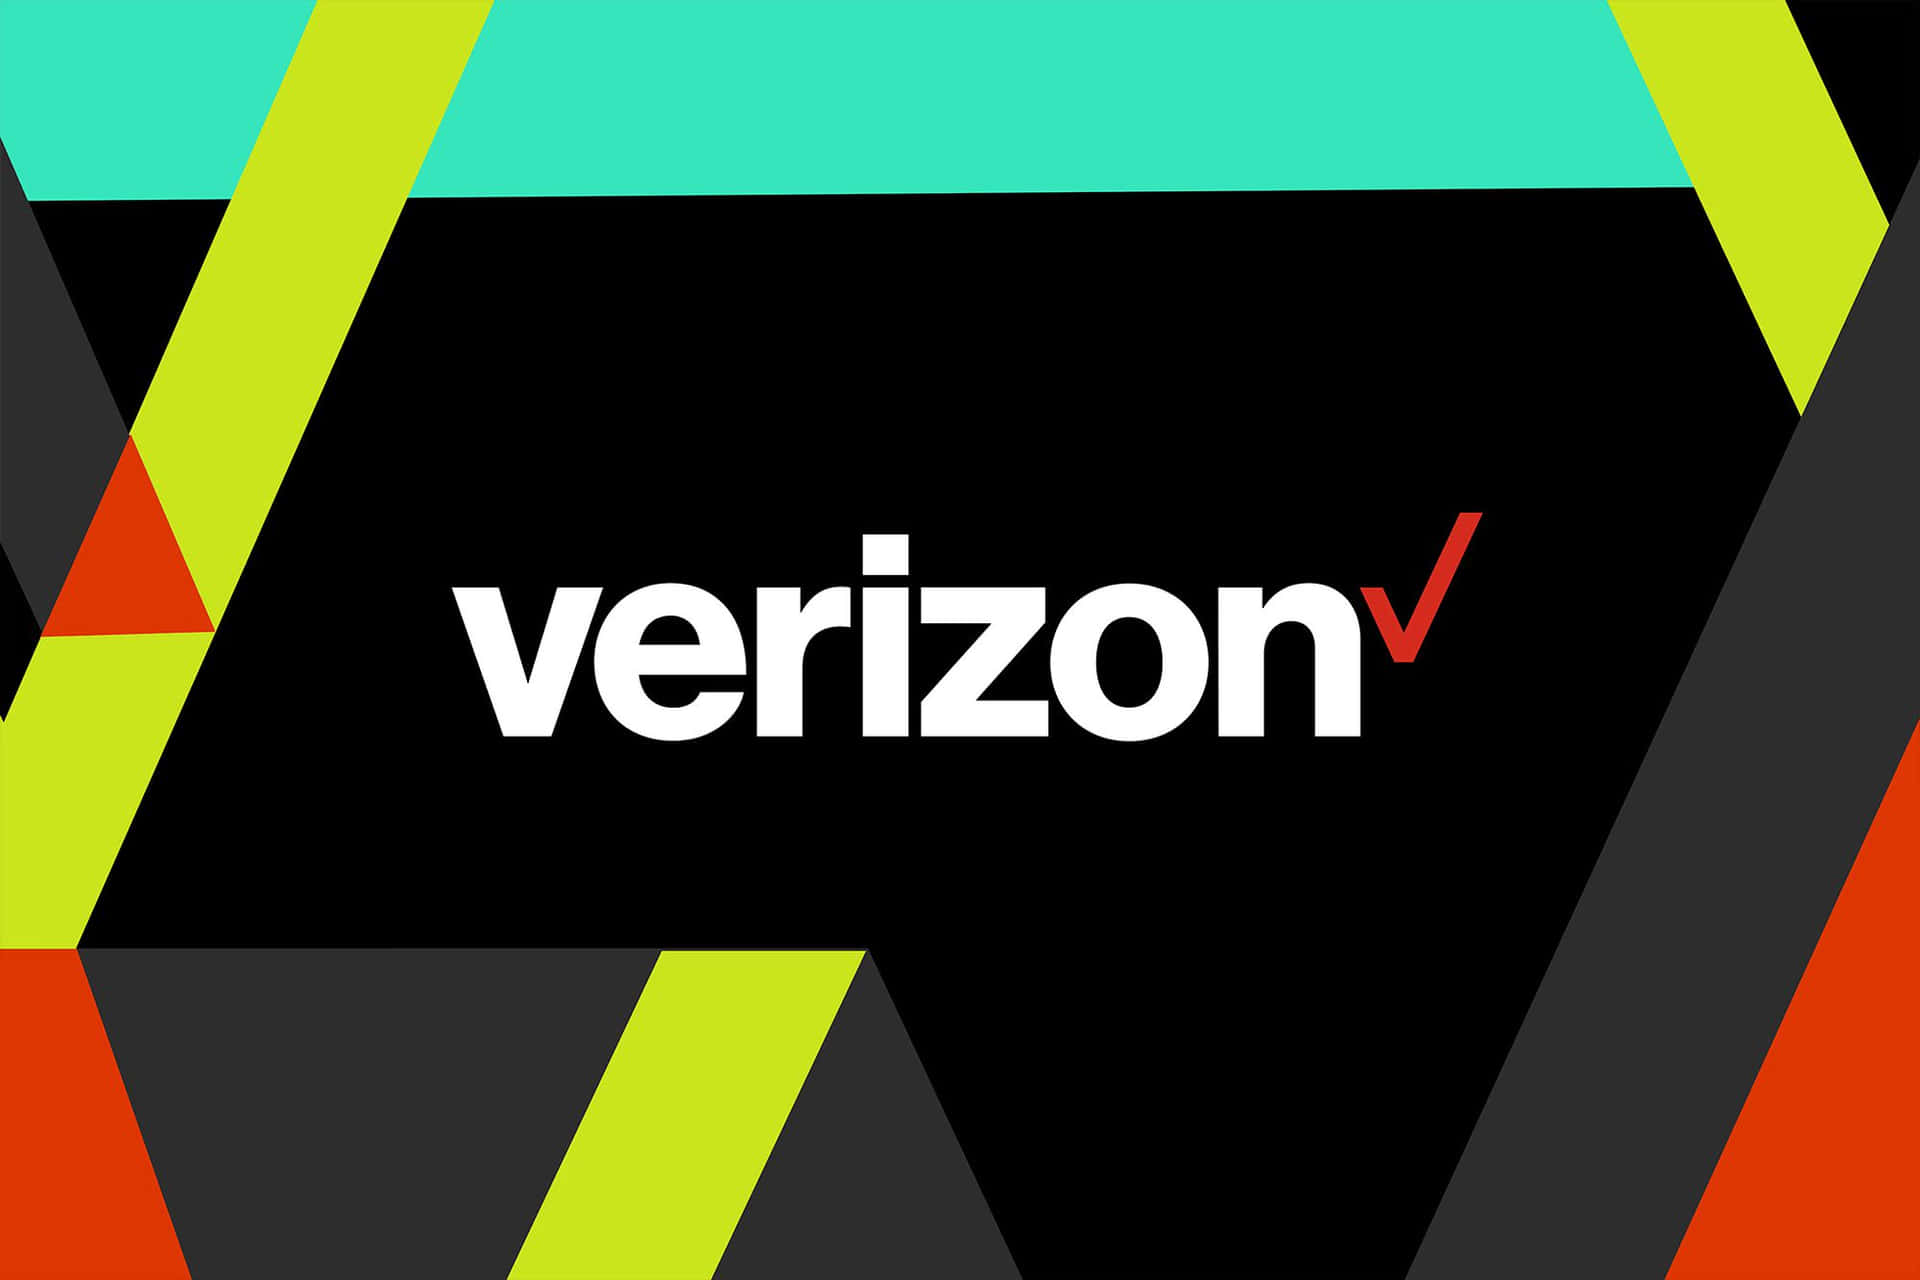 Get Connected with Verizon